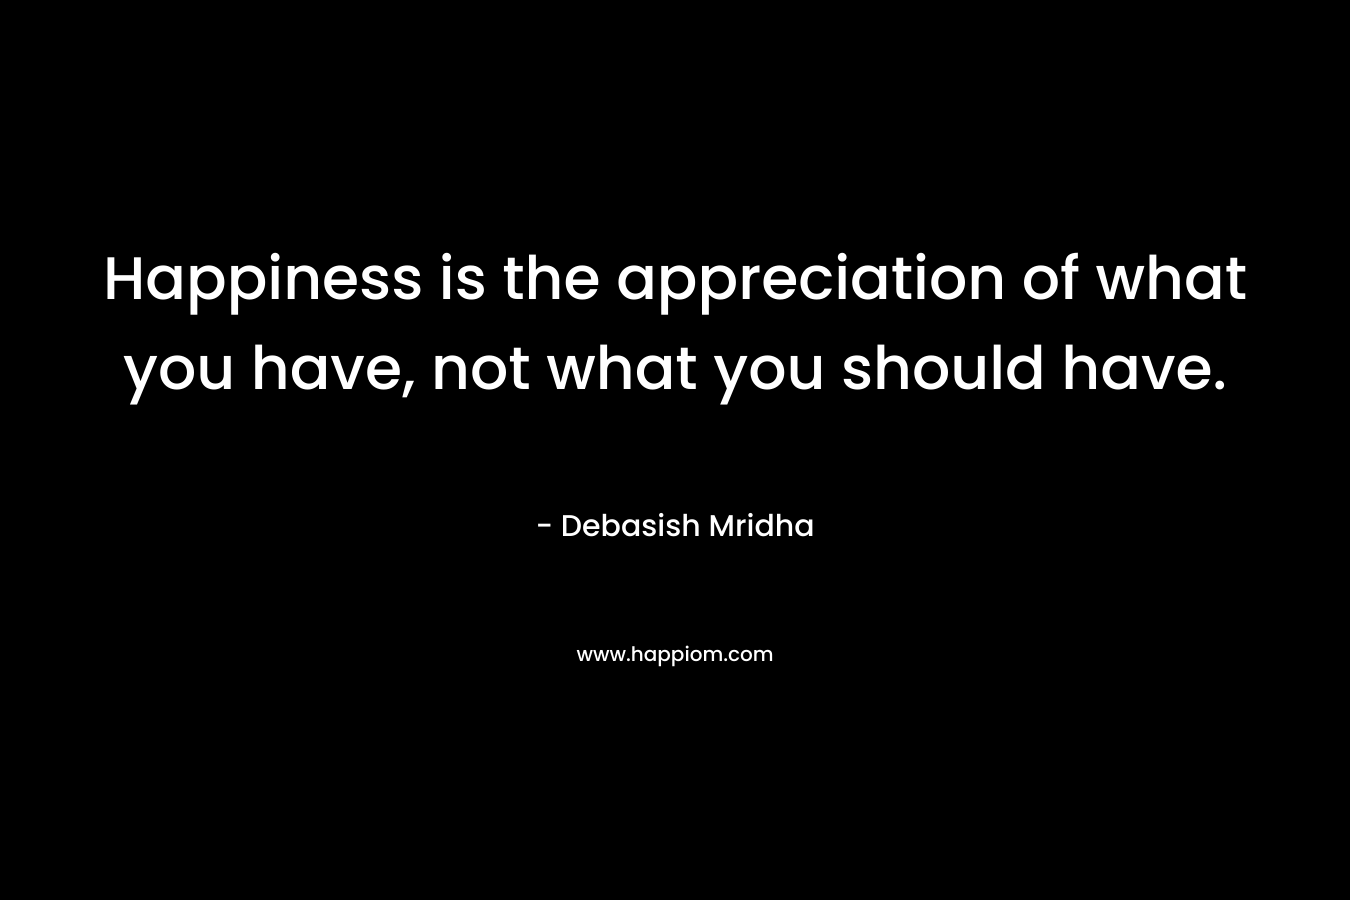 Happiness is the appreciation of what you have, not what you should have. – Debasish Mridha